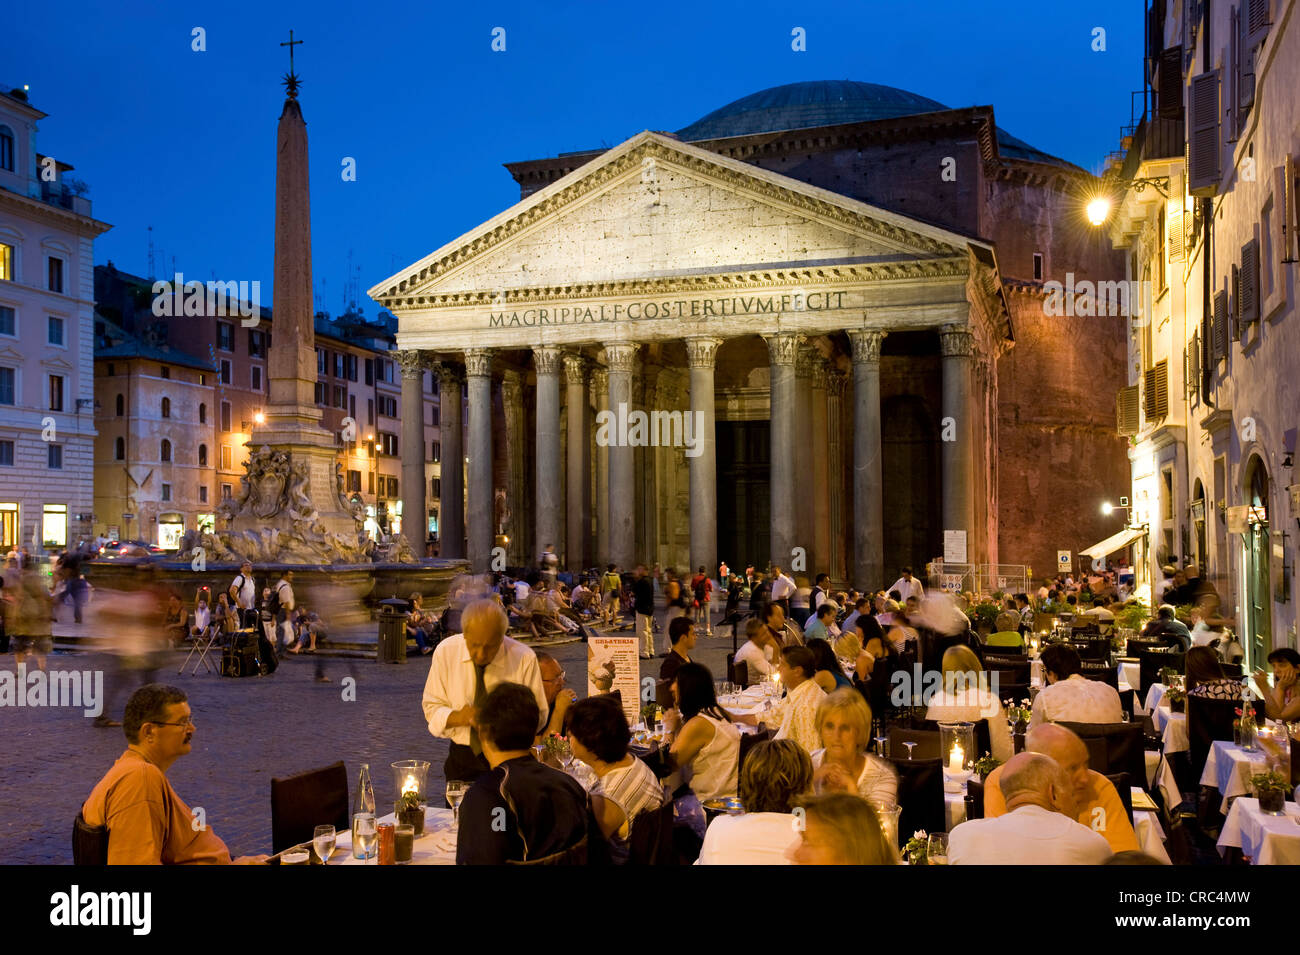 The Pantheon and the Piazza della Rotonda with restaurants at dusk, Rome, Italy, Europe Stock Photo